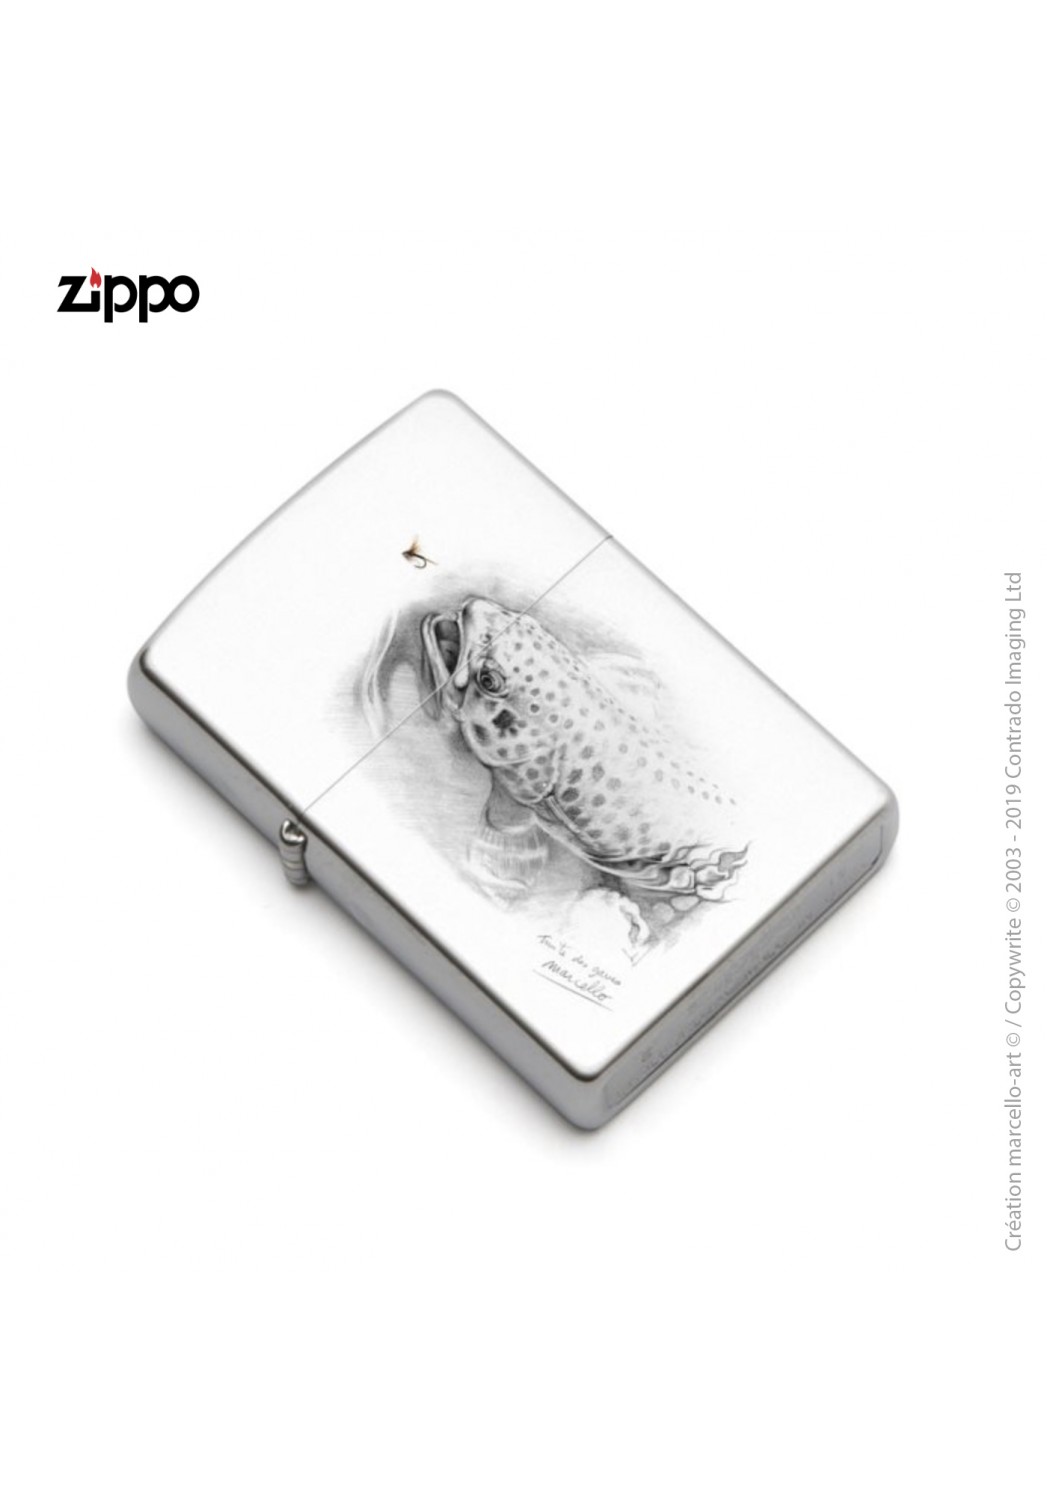 Marcello-art: Decoration accessoiries Zippo 46 Trout of the Gaves